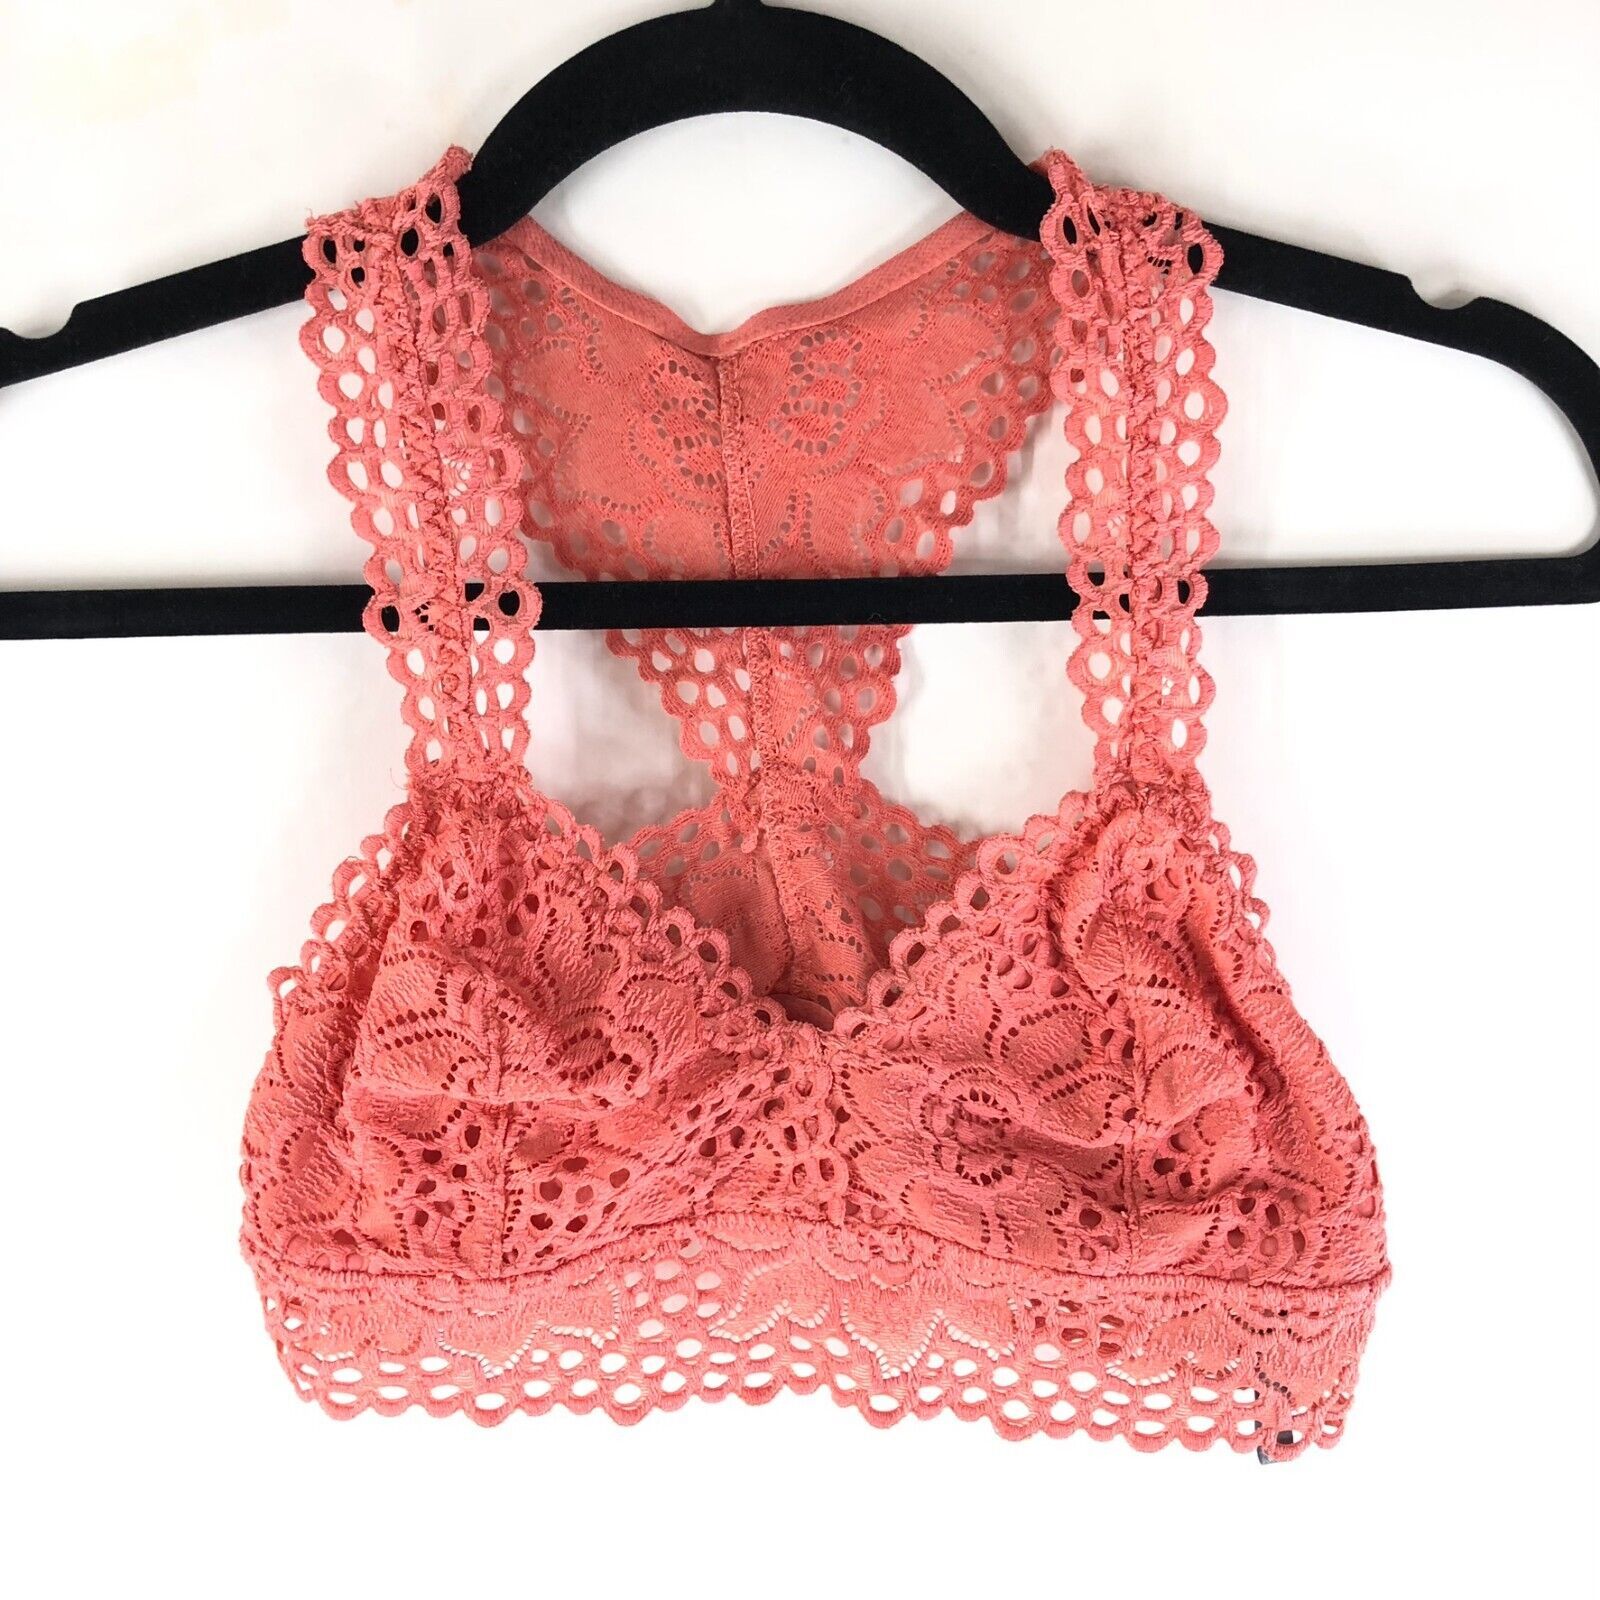 Primary image for Aerie Bralette Lace Racerback Stretch Coral Salmon Pink XS